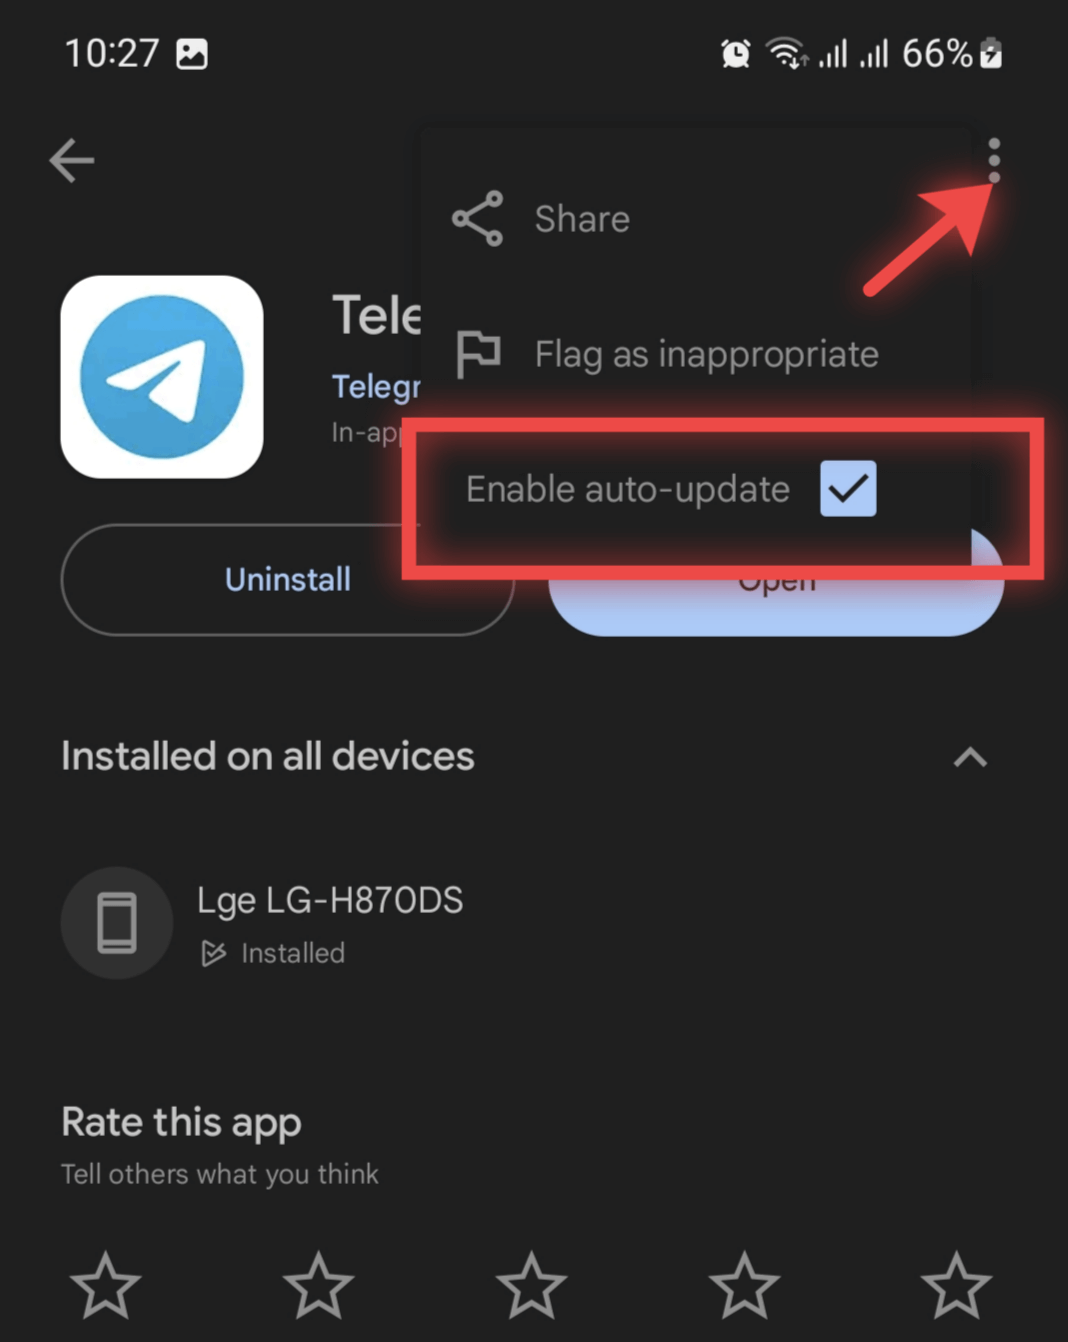 Enable auto update